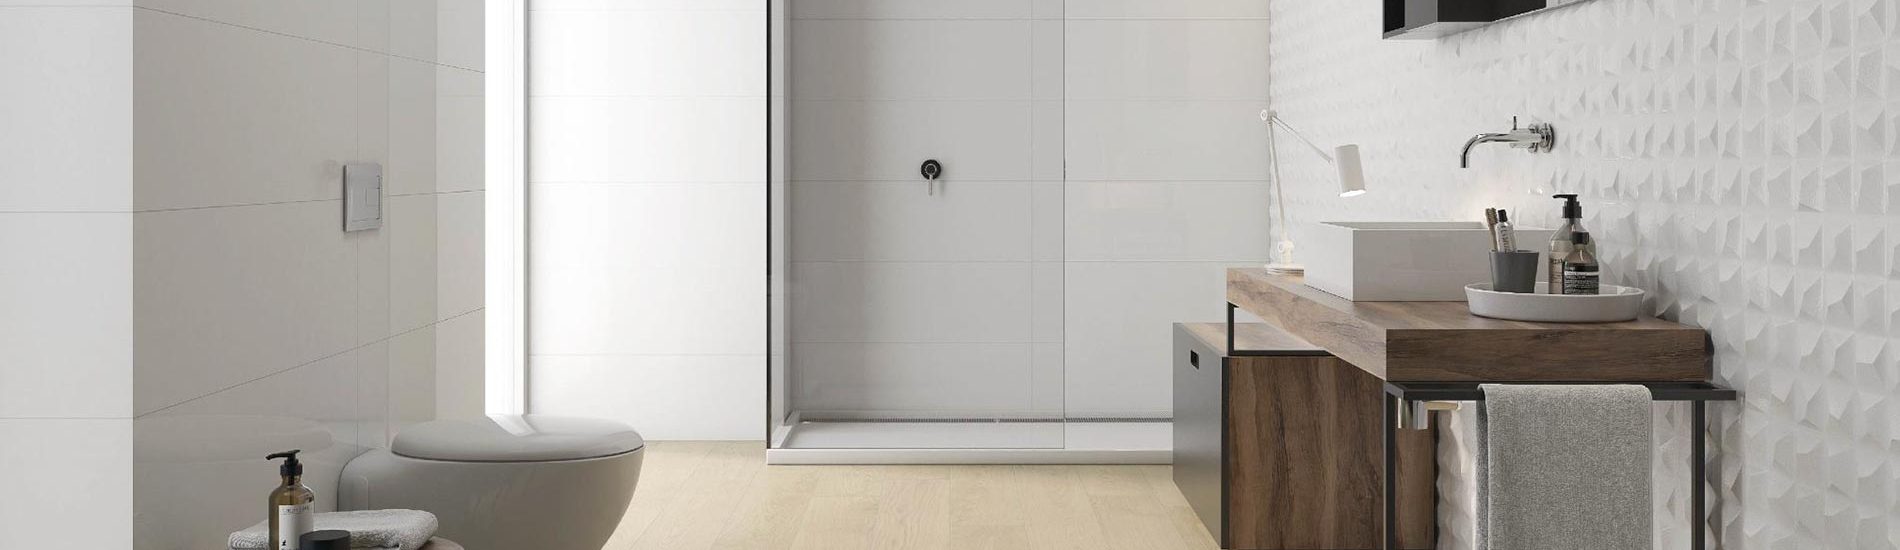 banner-candor-spanish-rectified-white-body-deco-floor-wall-tile-newker-anaheim